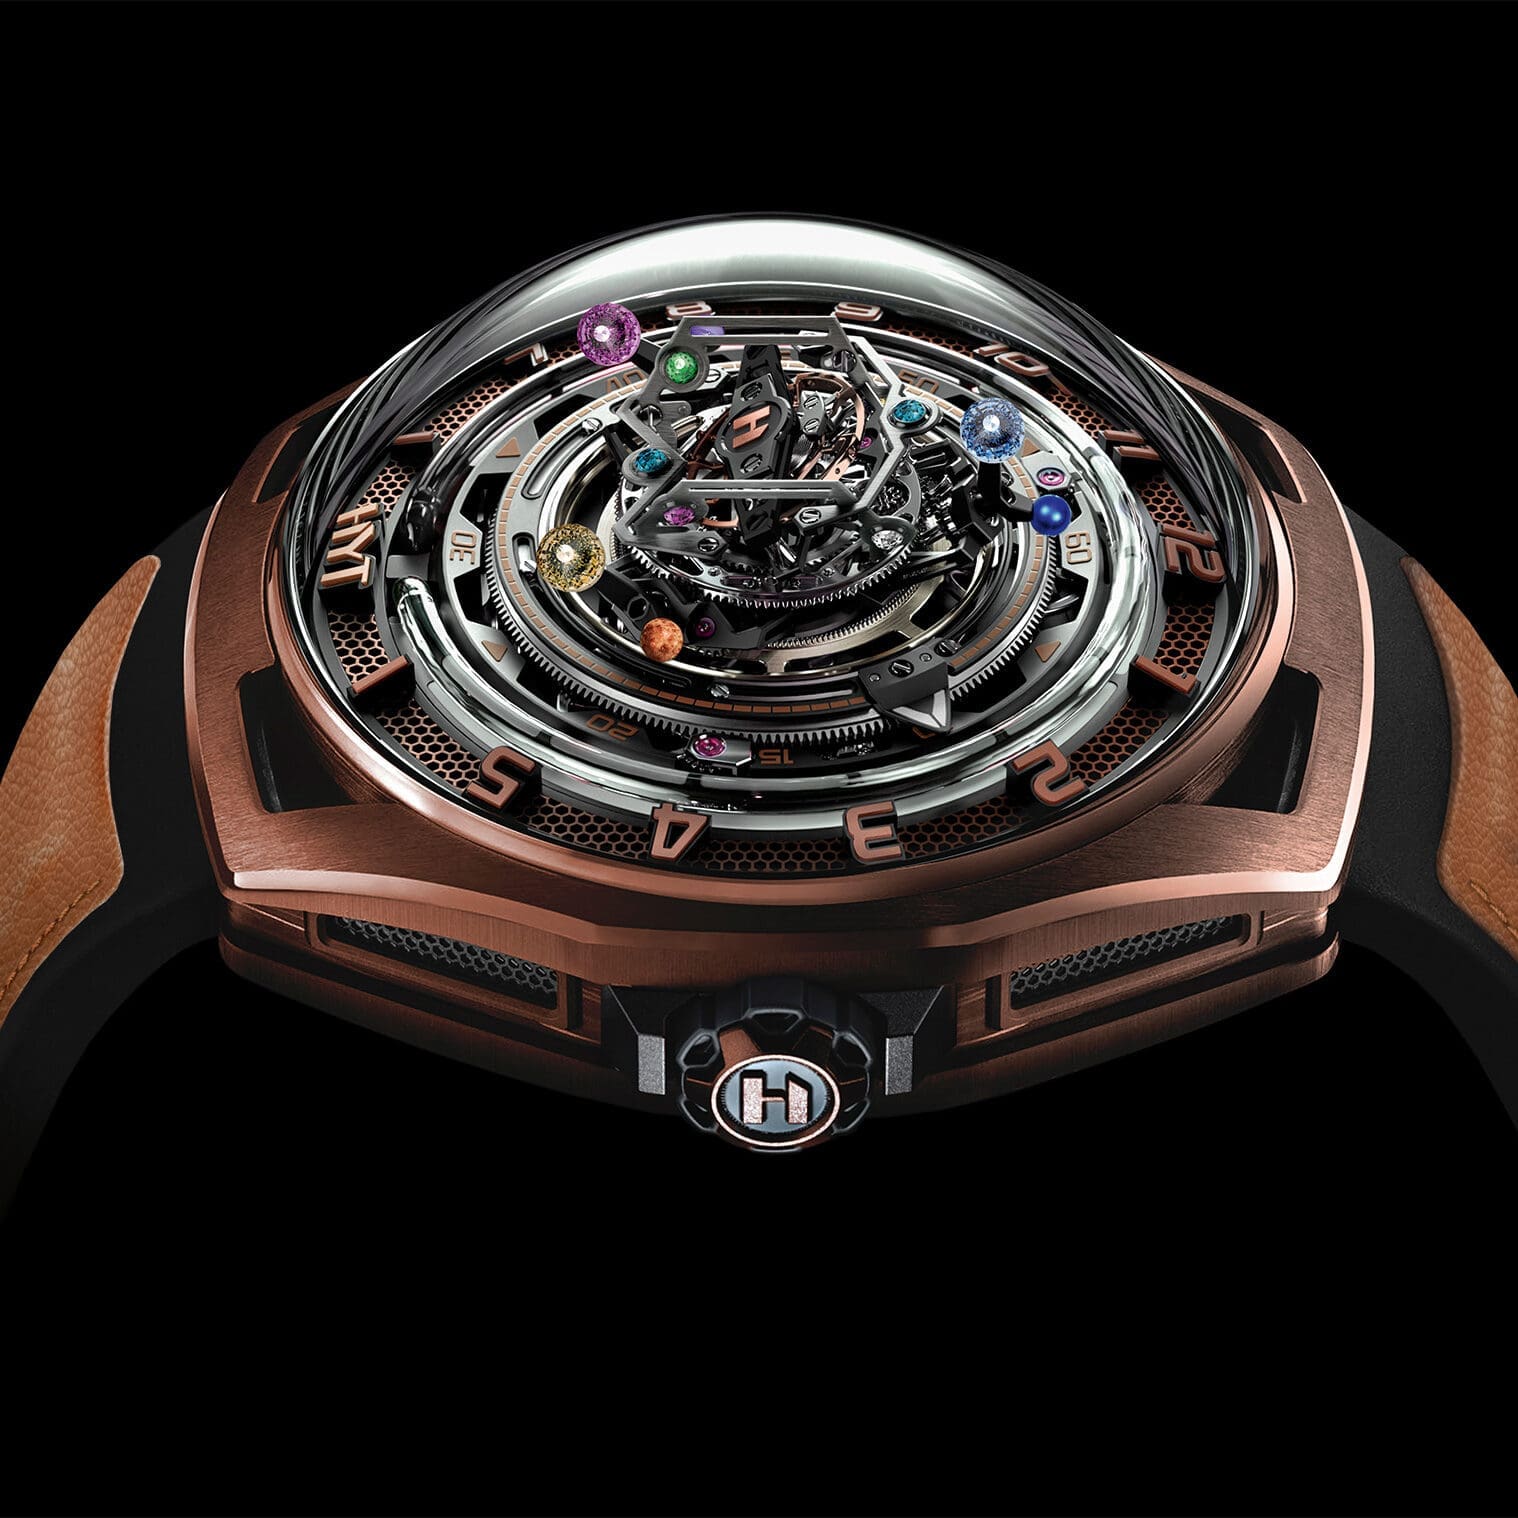 The new HYT Conical Tourbillon Infinity Sapphires is a high complication fit for Thanos